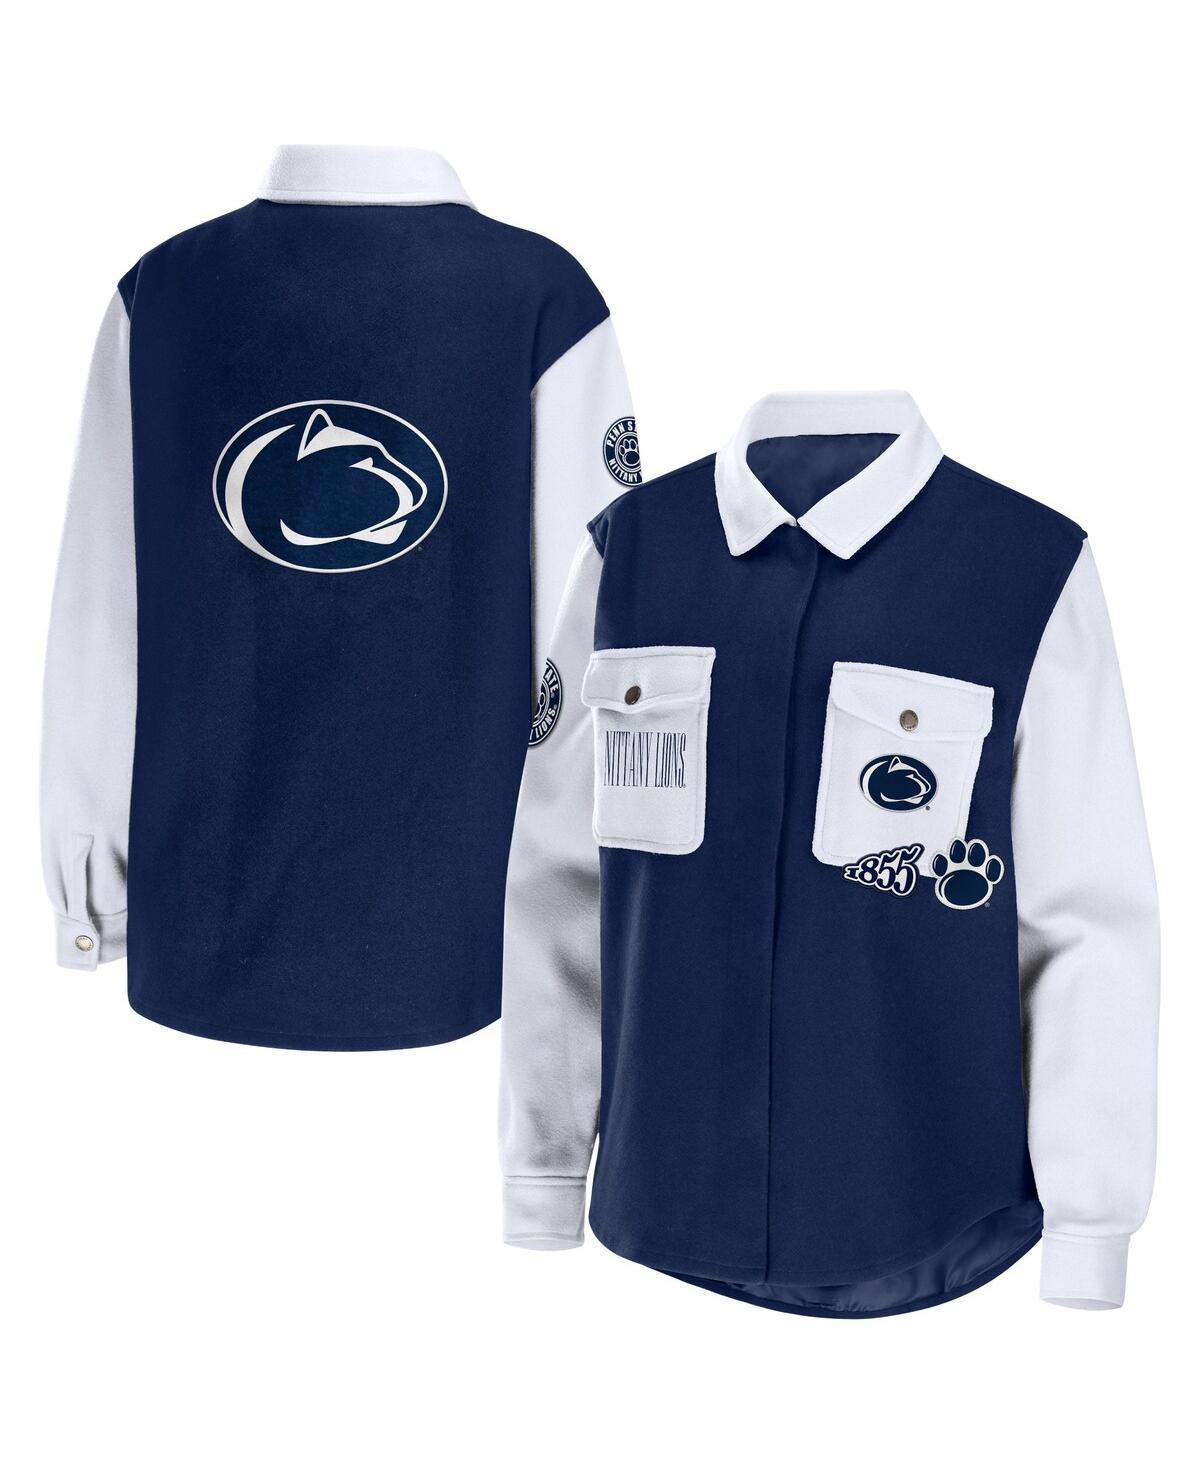 Shop Wear By Erin Andrews Women's  Navy Penn State Nittany Lions Button-up Shirt Jacket